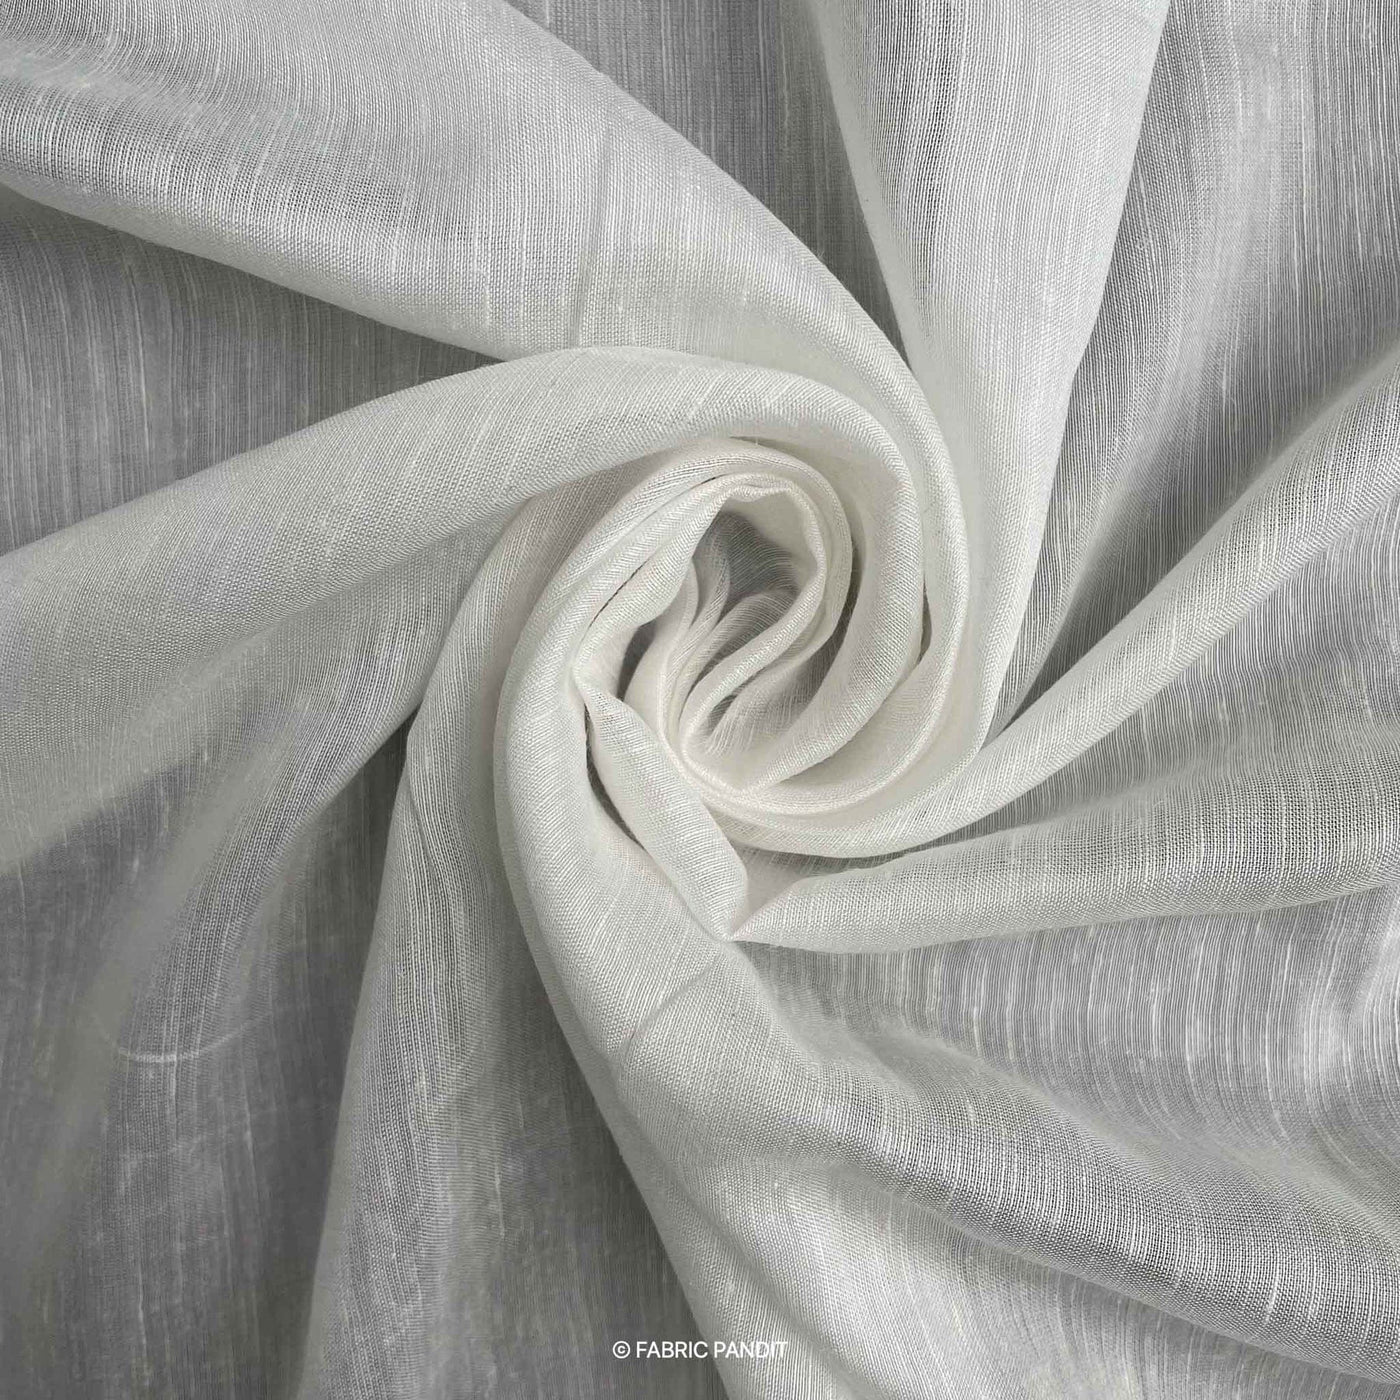 Fabric Pandit Fabric White Dyeable Pure Bemberg Silk Linen Plain Fabric (Width 44 inches, 66 Gms)